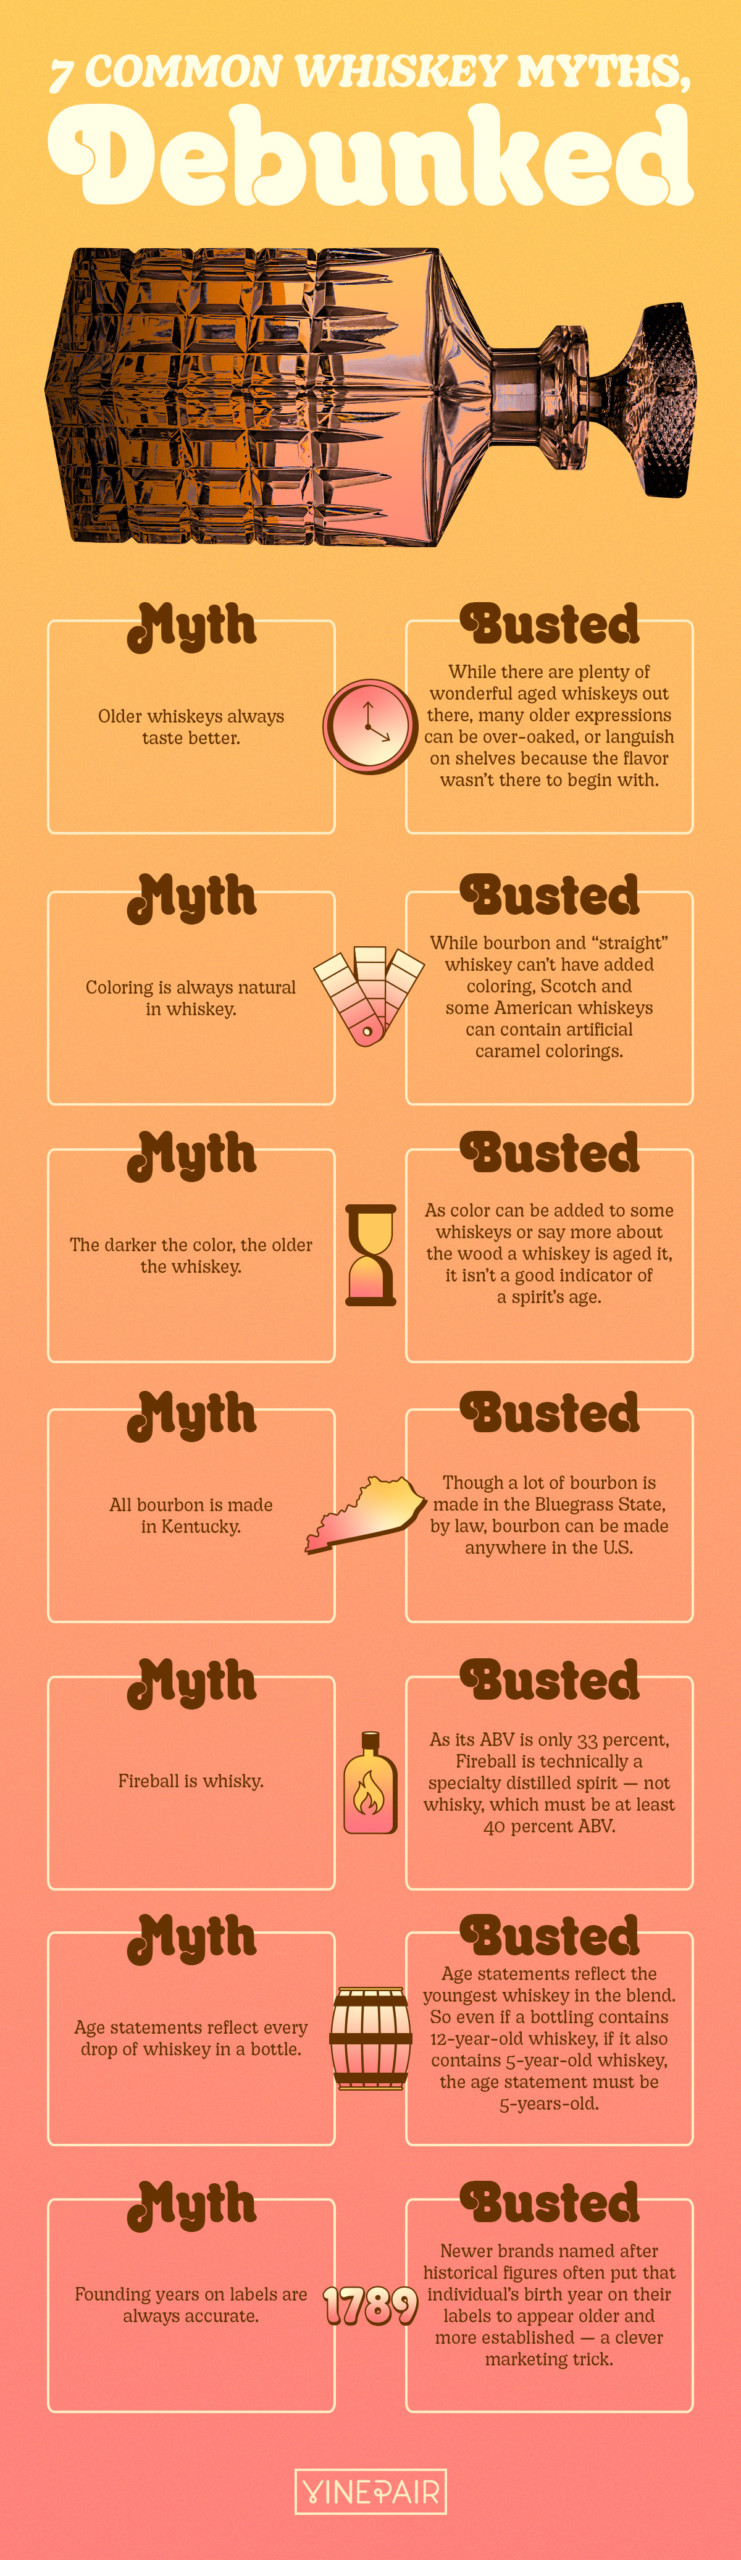 graphic of 7 common whiskey myths, debunked